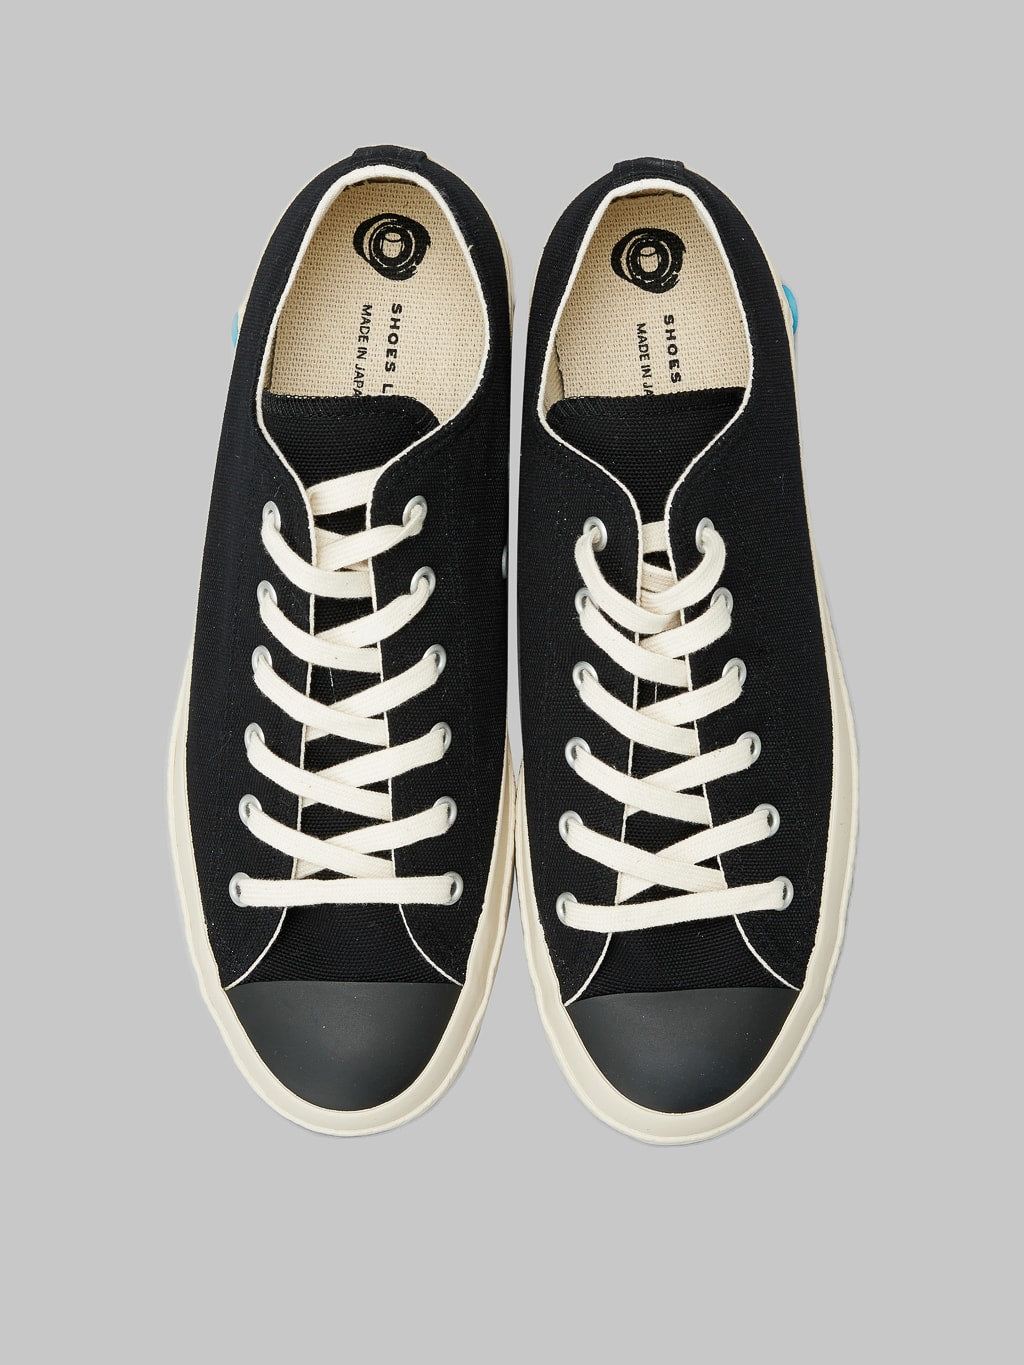 Shoes like pottery low sneaker black up view